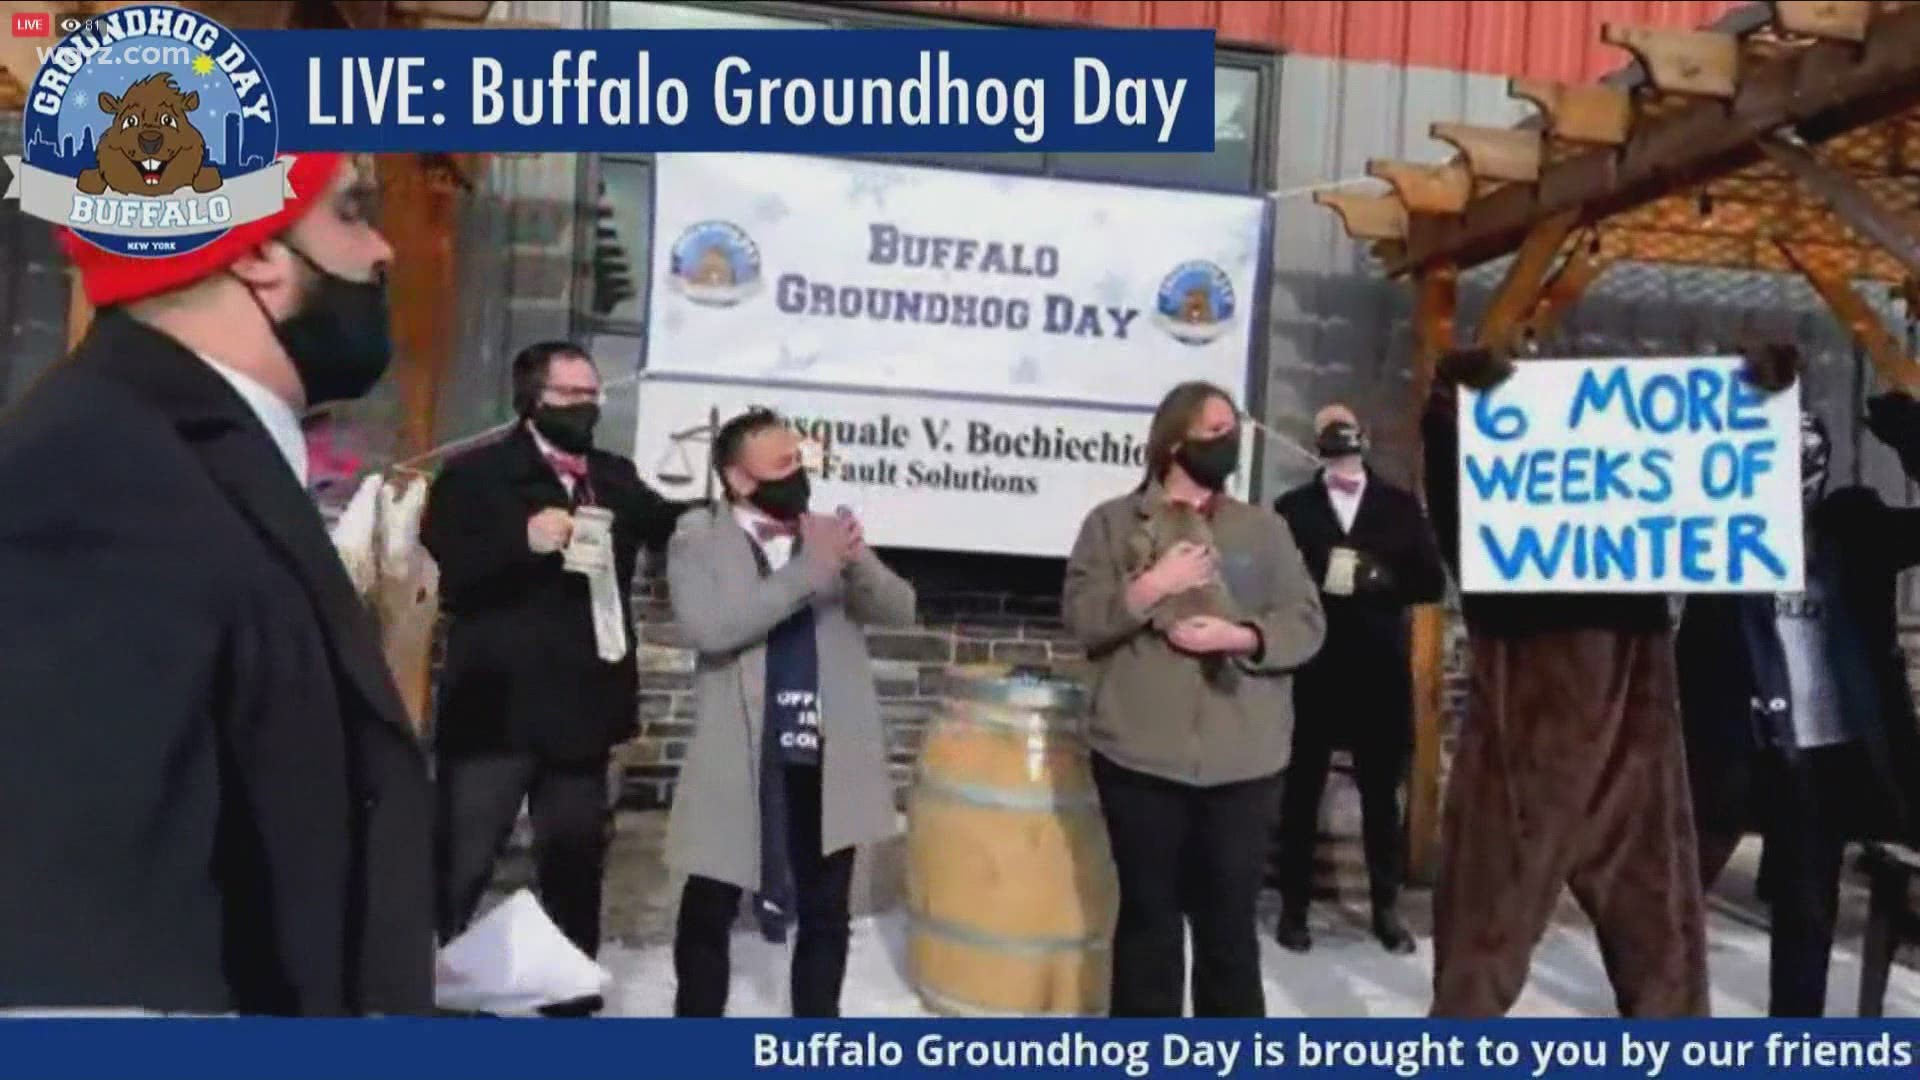 While Groundhog Day is technically February 2nd the Buffalo Groundhog Day Society held their virtual bash early.